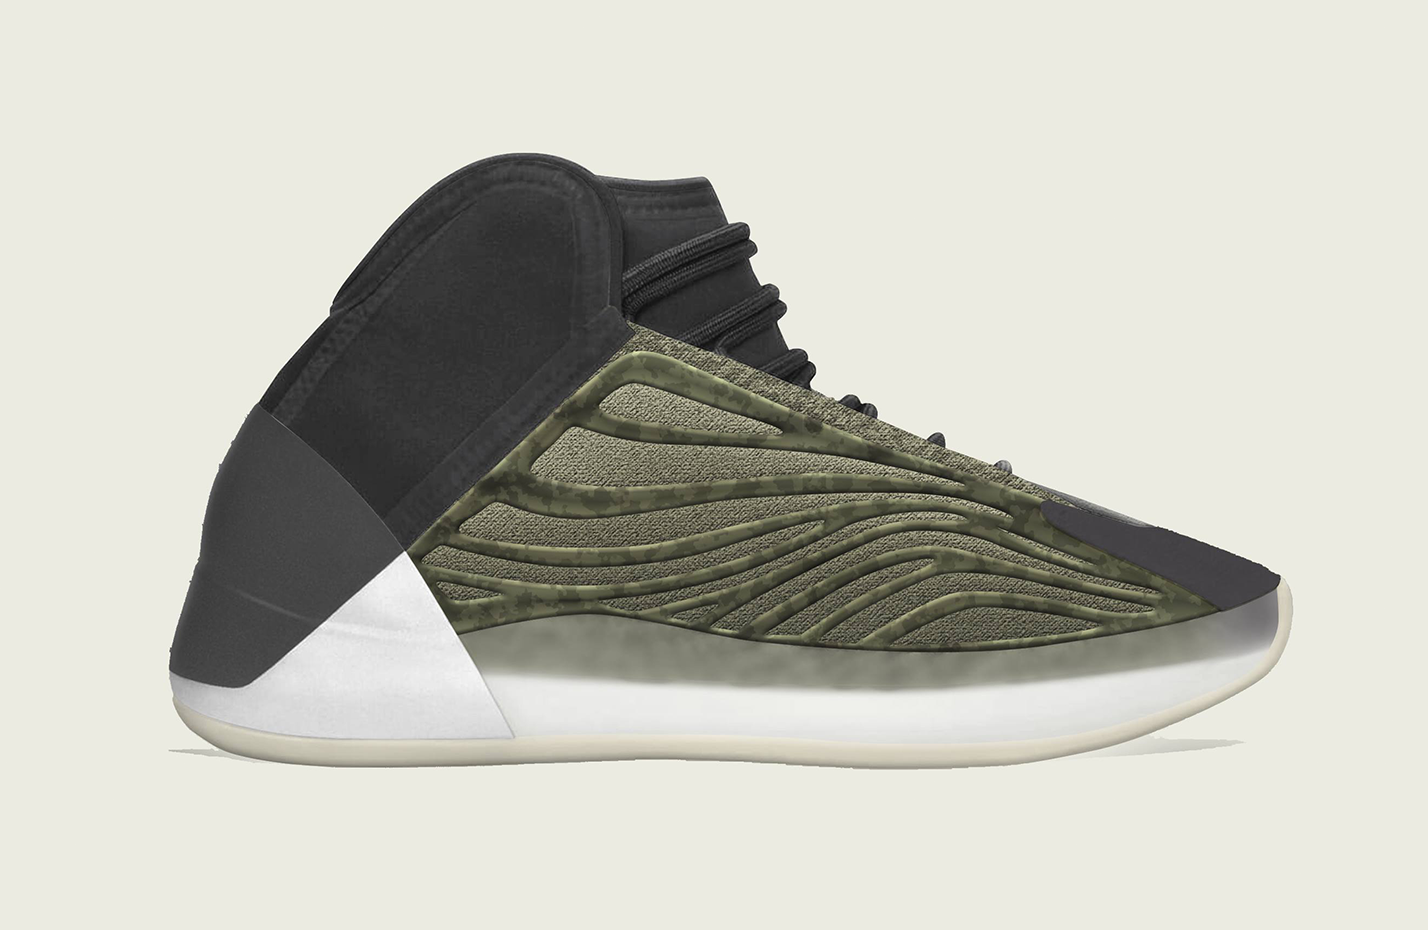 adidas-Yeezy-Quantum-Basketball-Barium-H68771-Release-Date-Price.png